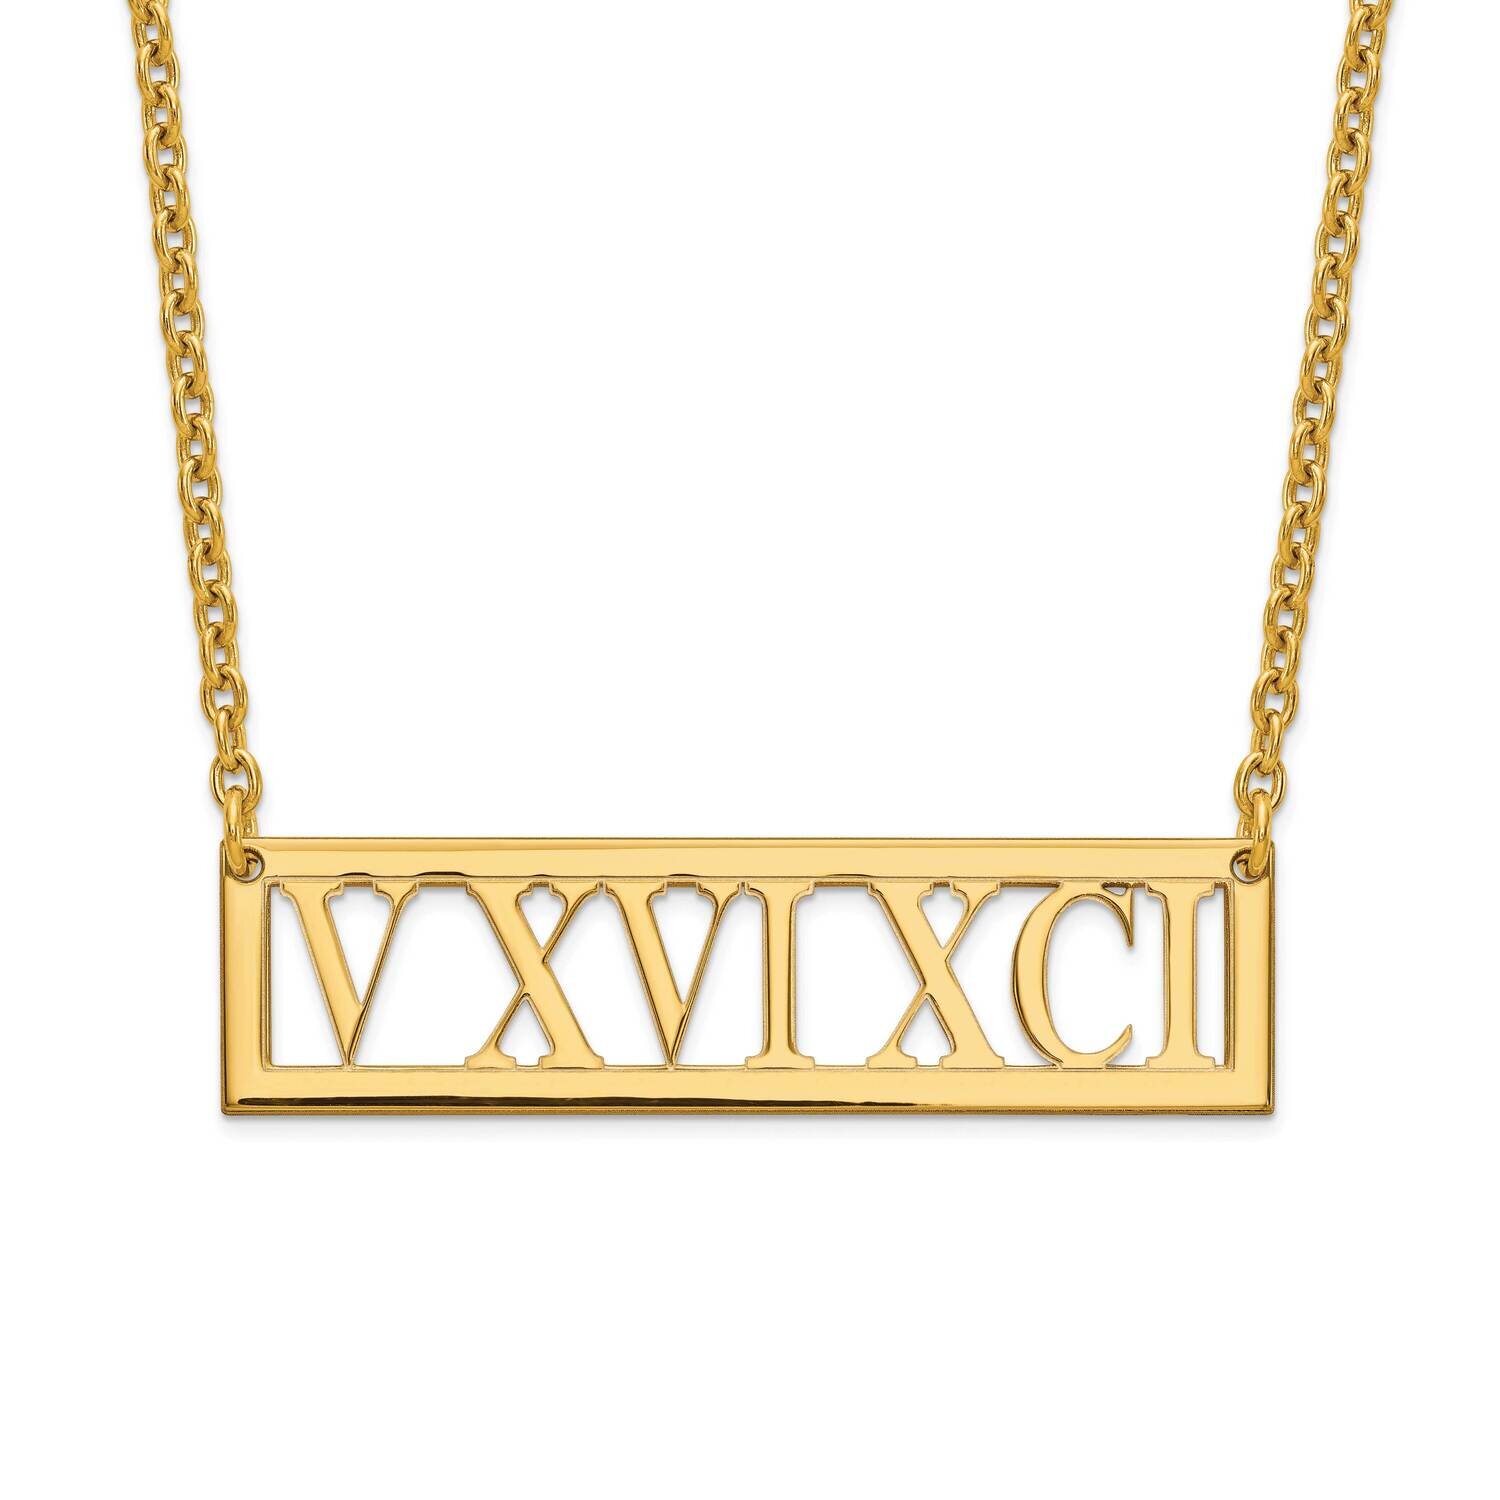 Roman Numeral Bar Necklace Gold Plated Sterling Silver XNA729GP